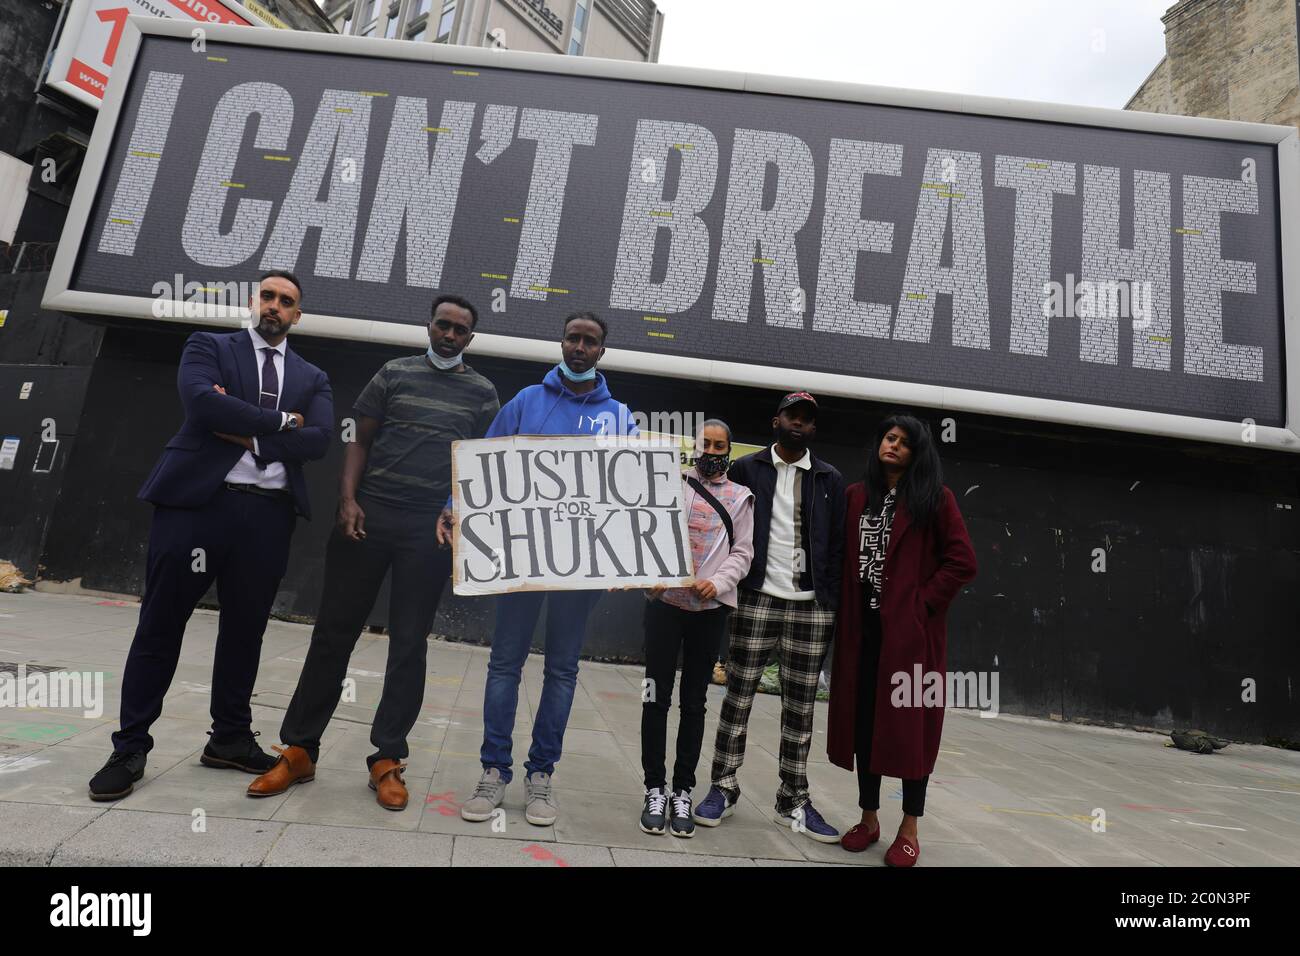 Members of the Justice for Shukri campaign at the unveiling of a Black Lives Matter UK (BLMUK) billboard on Westminster Bridge Road, London, which lists more than 3000 names of people who have died in police custody, prisons, immigration detention centres and in racist attacks in the UK, as well as those who have died as the result of coronavirus. The billboard has been erected by BLMUK, in collaboration with the United Families and Friends Campaign, Justice for Belly, Justice for Shukri, Migrants Organise and the Grenfell Estate. Stock Photo